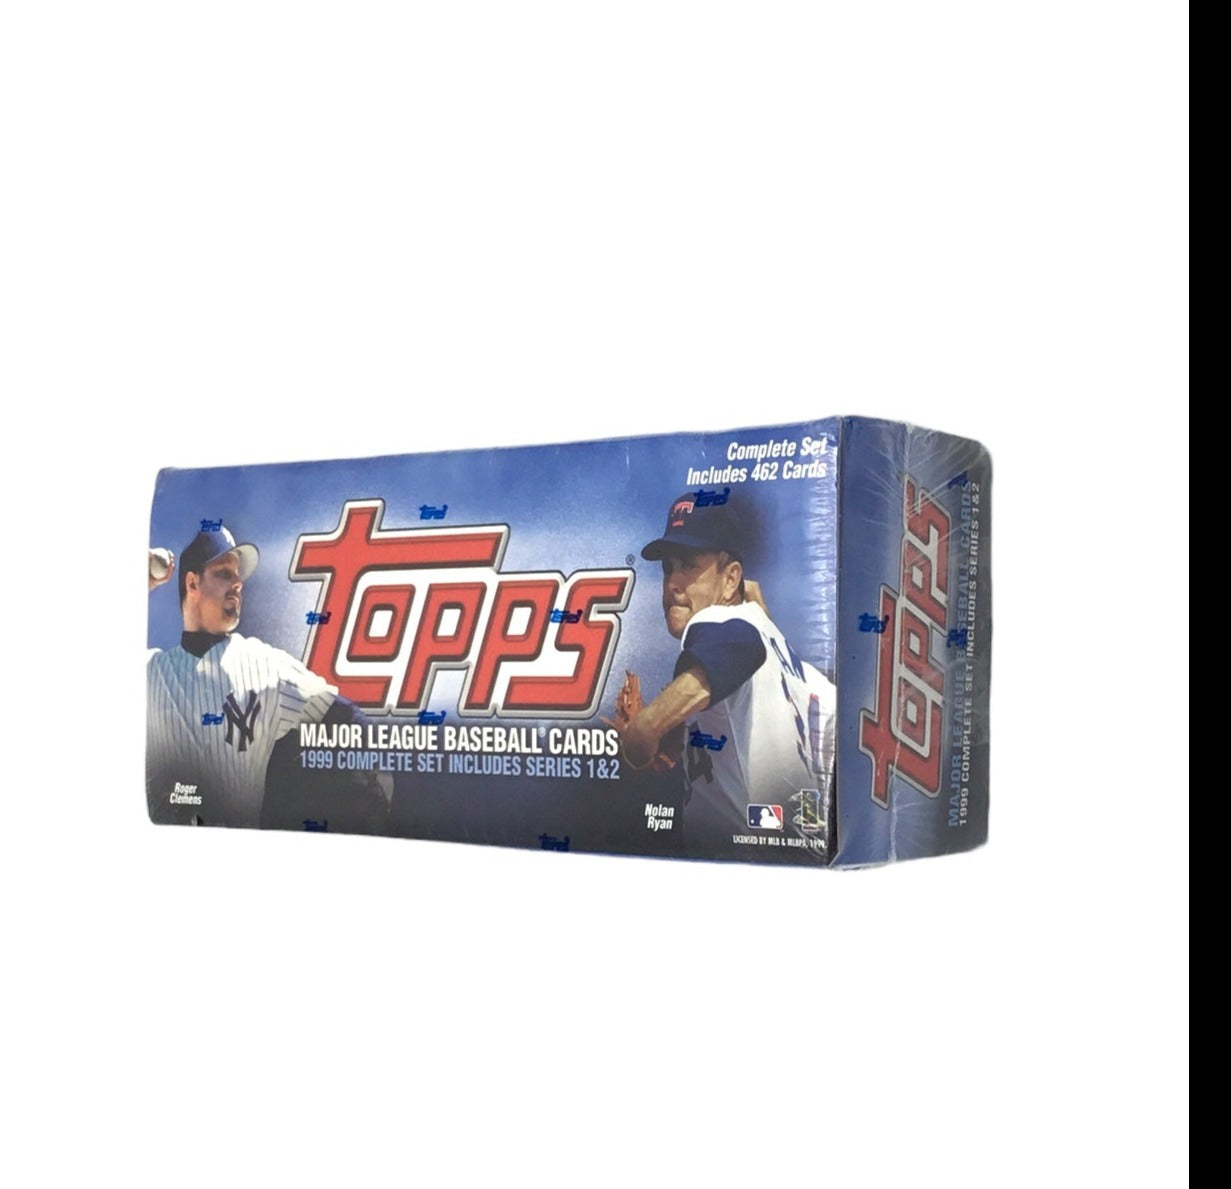 1999 Topps Baseball Complete Factory Sealed 462 Card Set Series 1 & 2